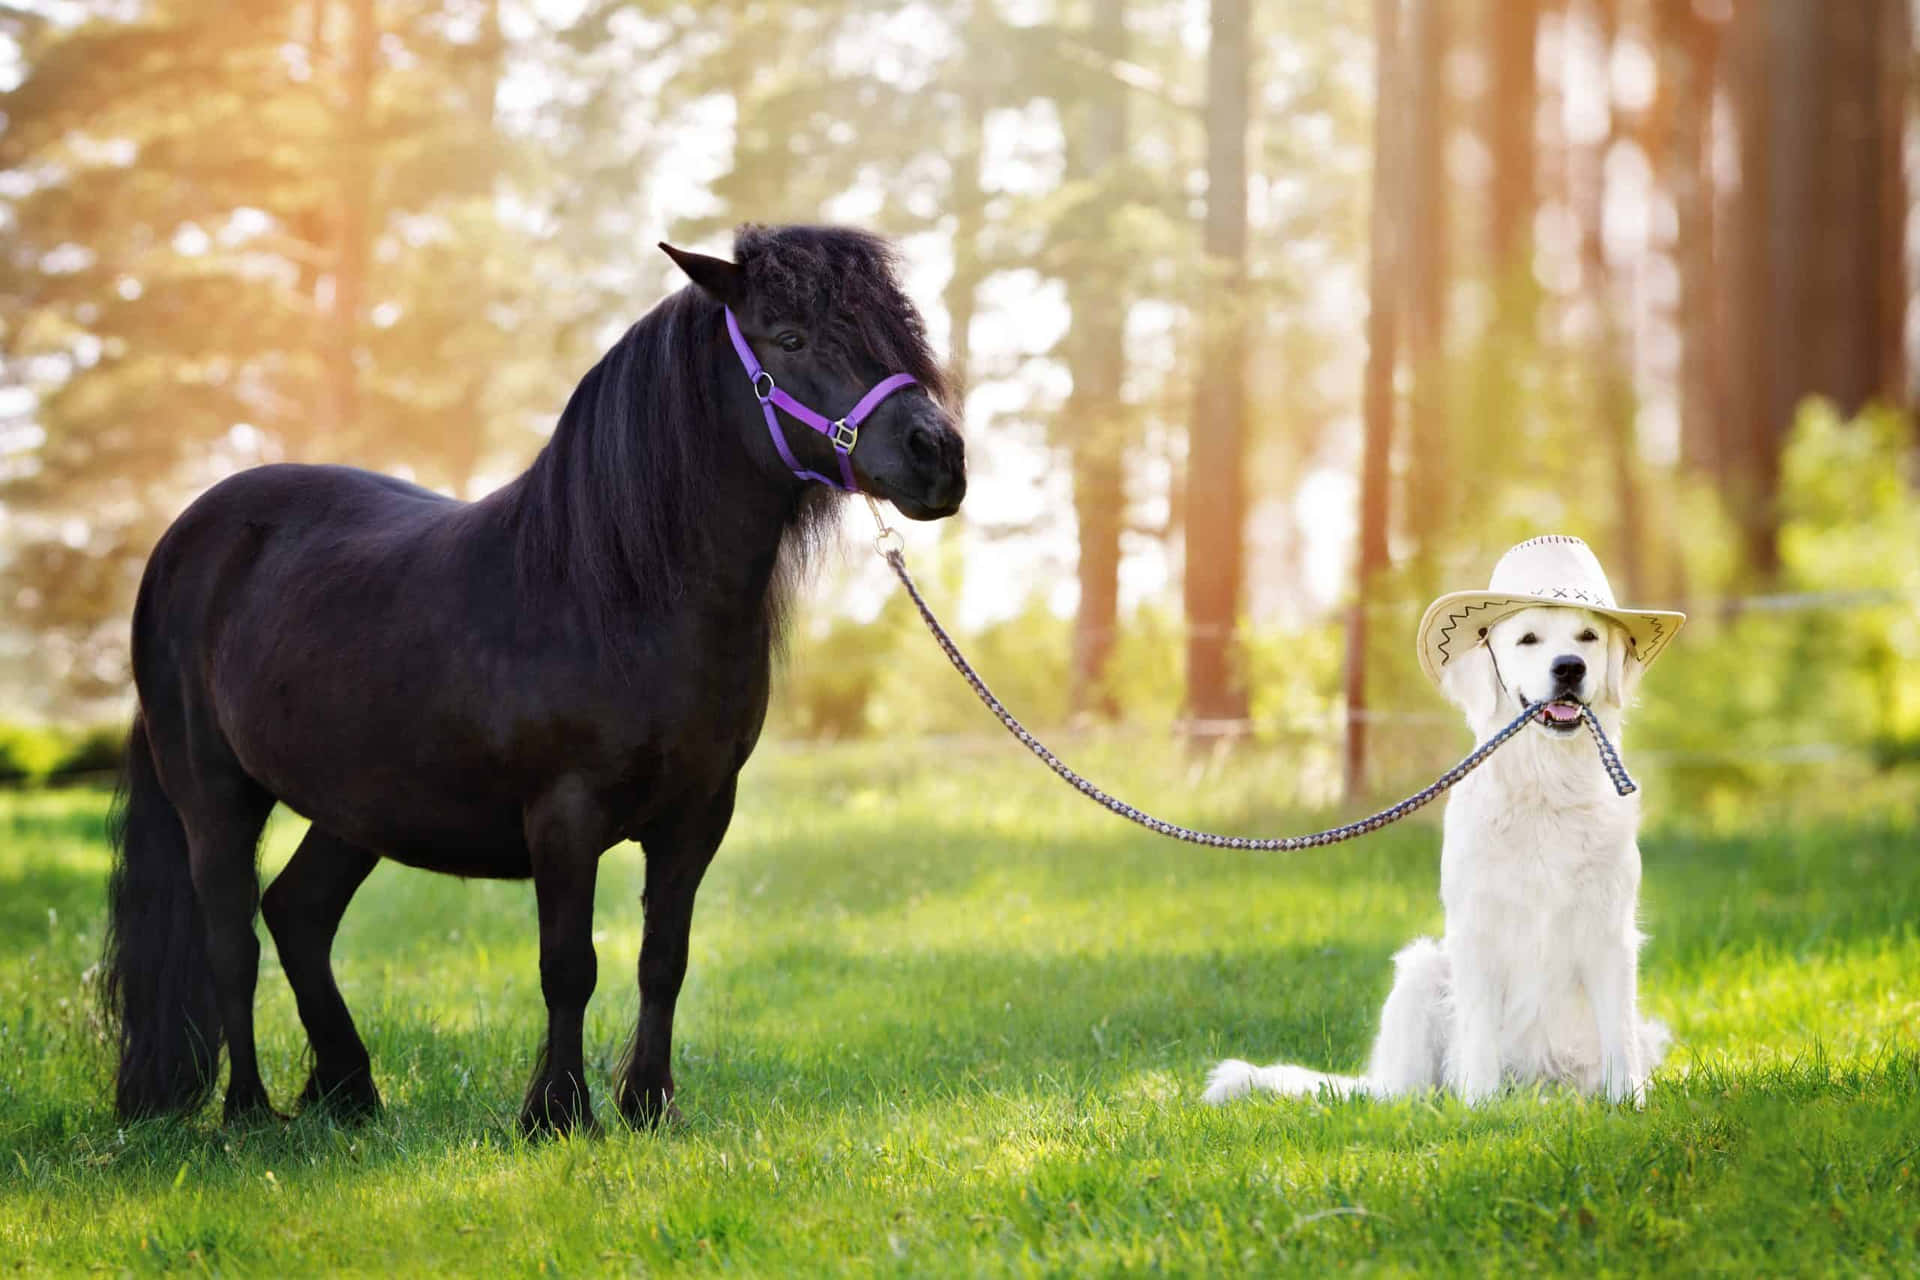 Incredible Moment Between Horse And Dog Wallpaper